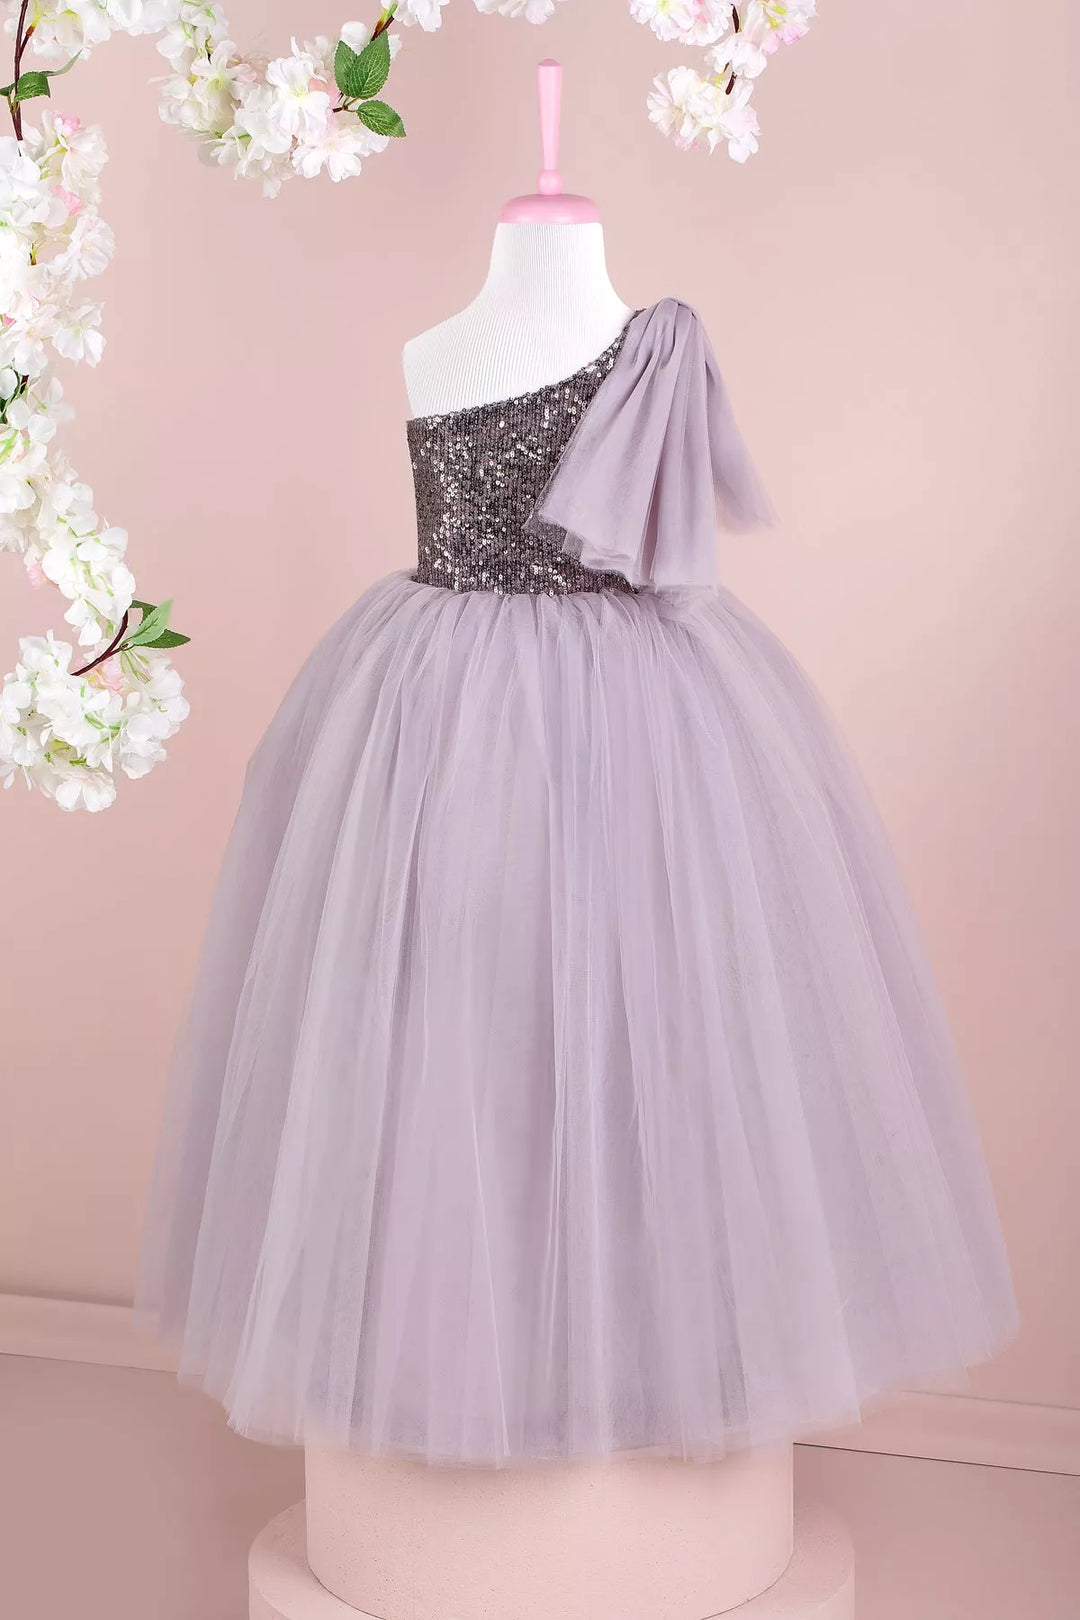 Gray party dress